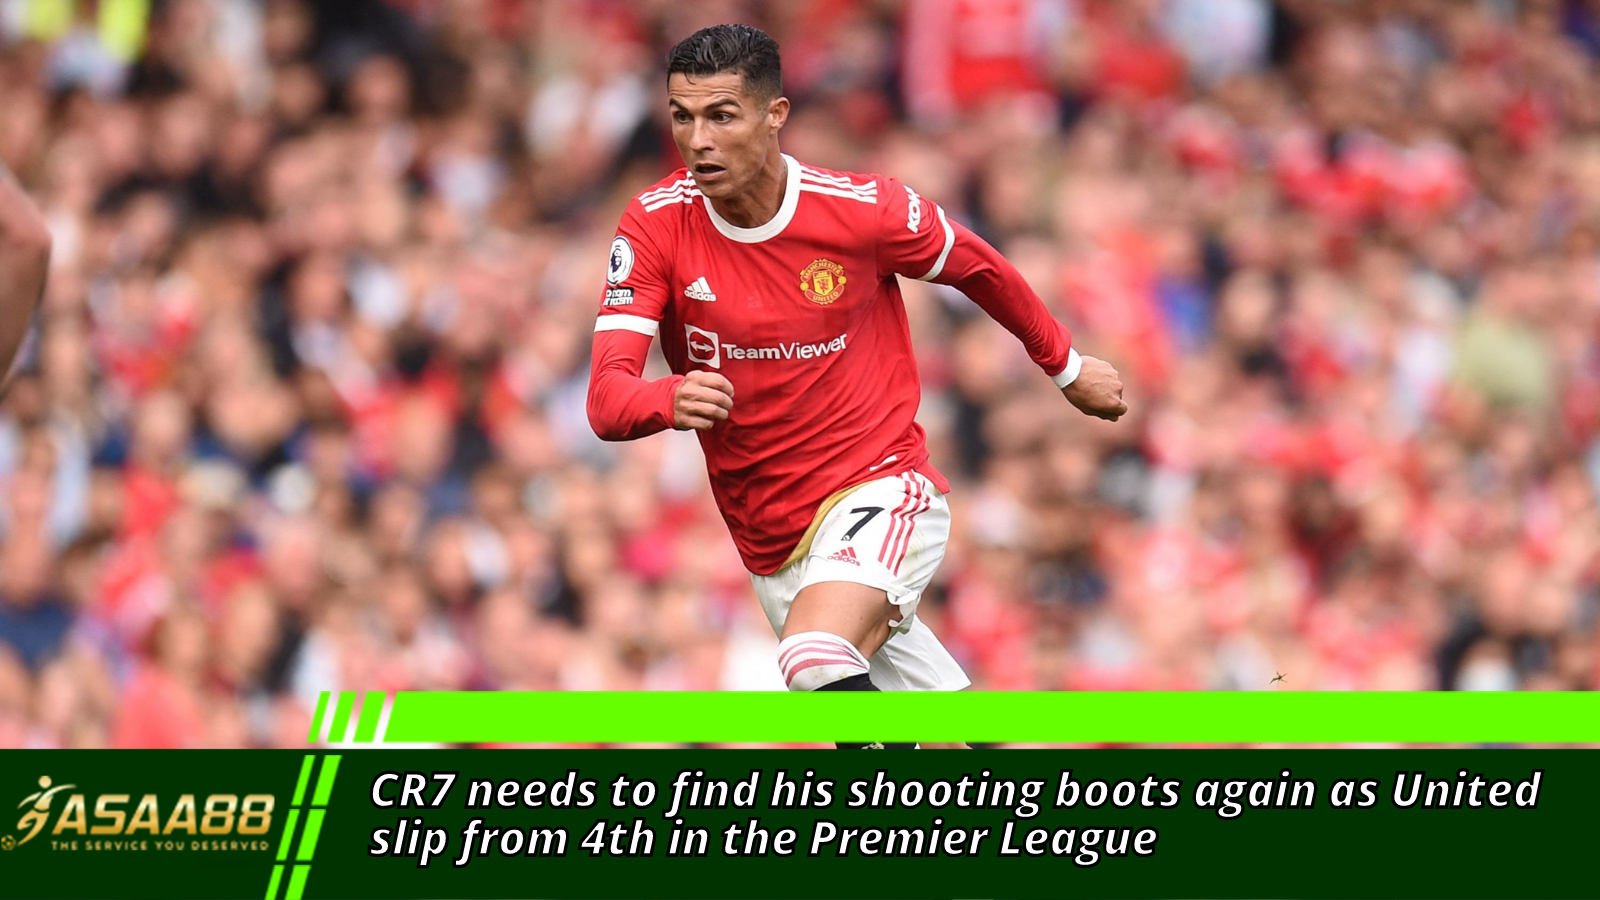 CR7 needs to find his shooting boots again as United slip from 4th in the Premier League